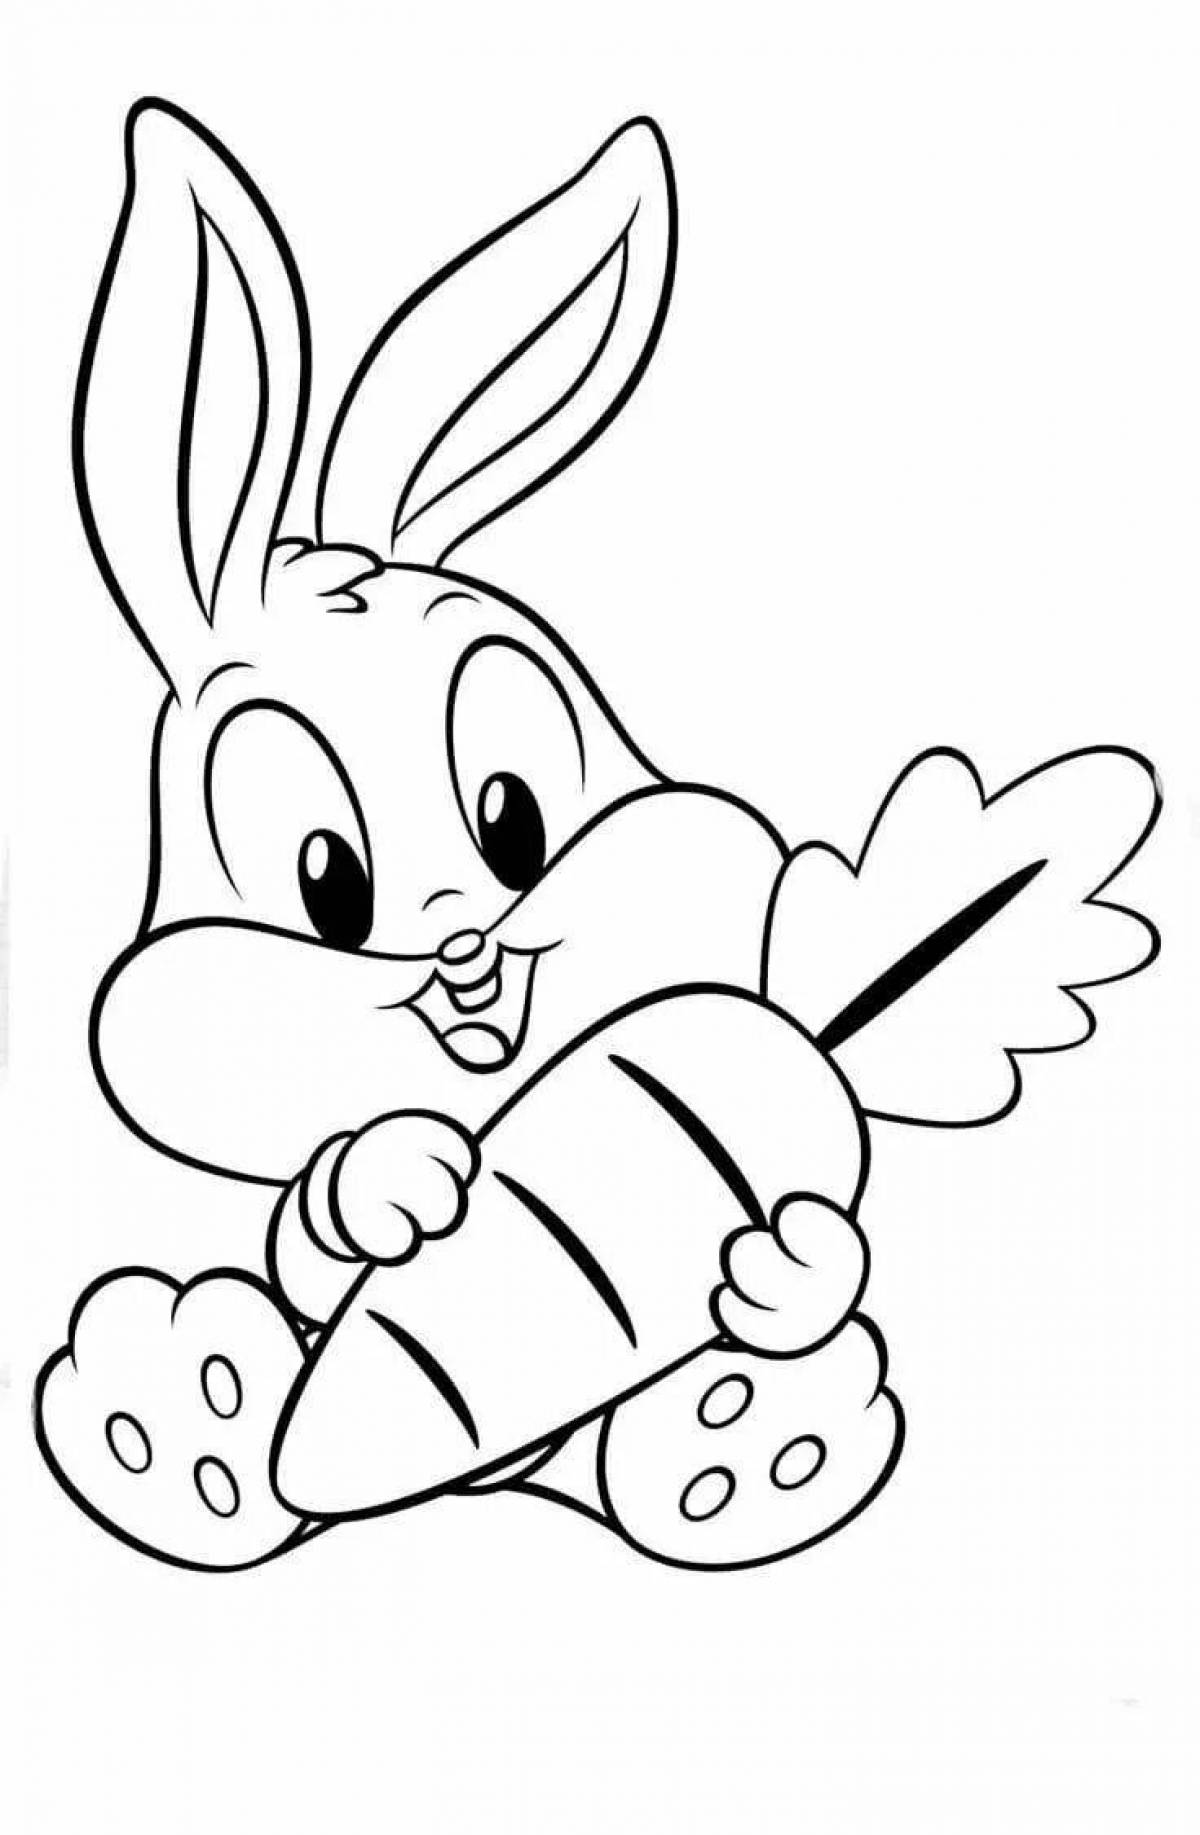 Violent bunny coloring pages for kids